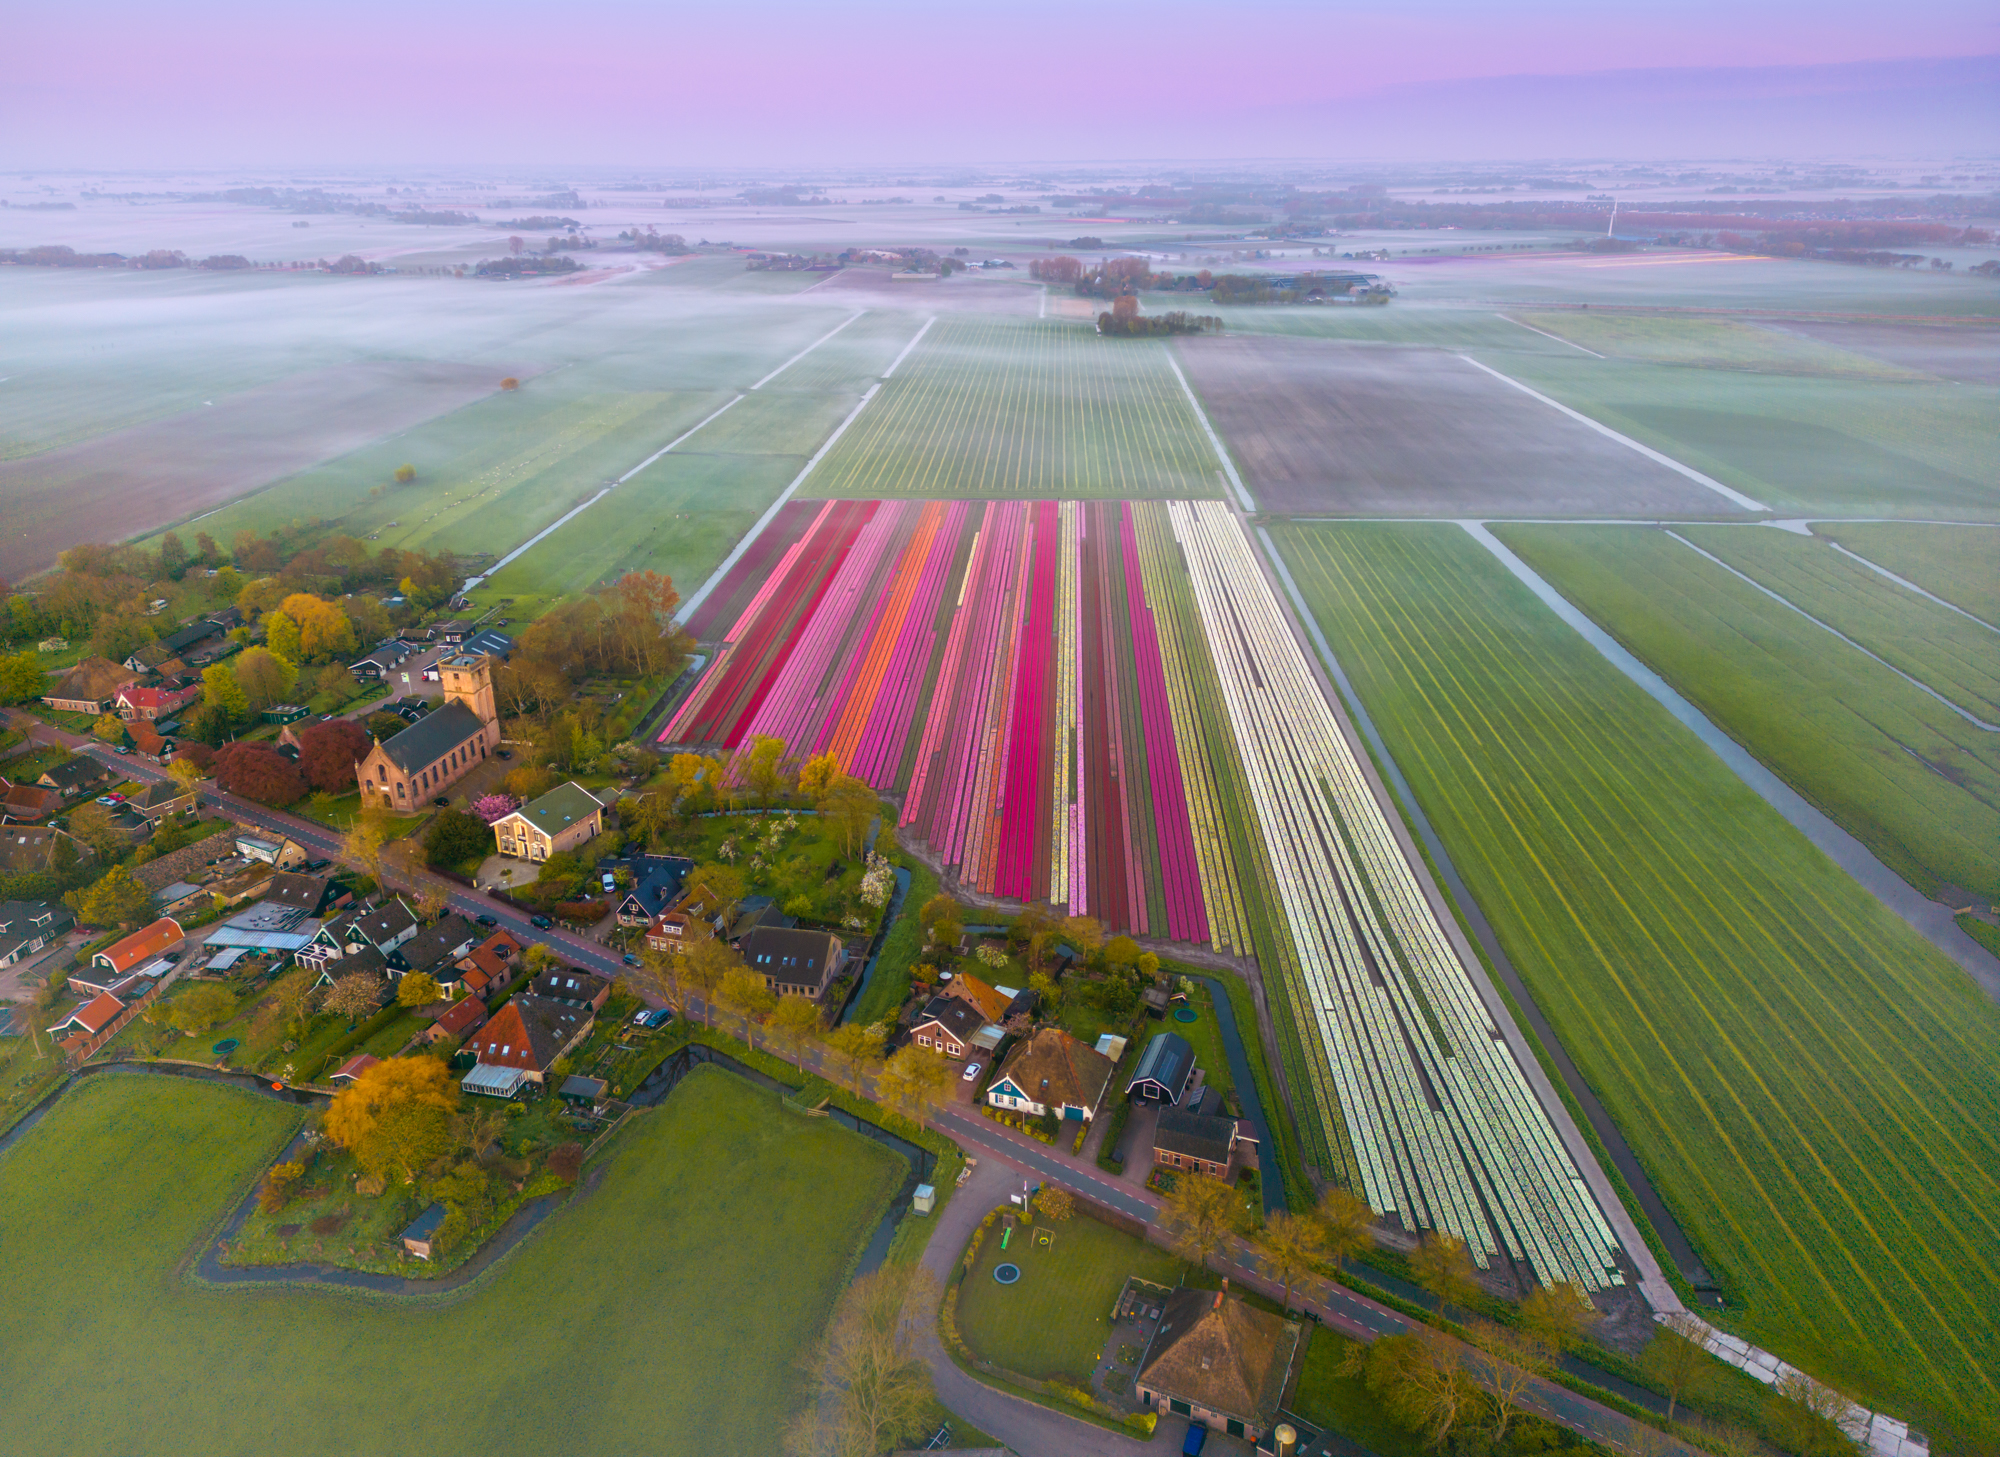 Picturesque villages with tulip fields. A theme I photographed a lot this year.